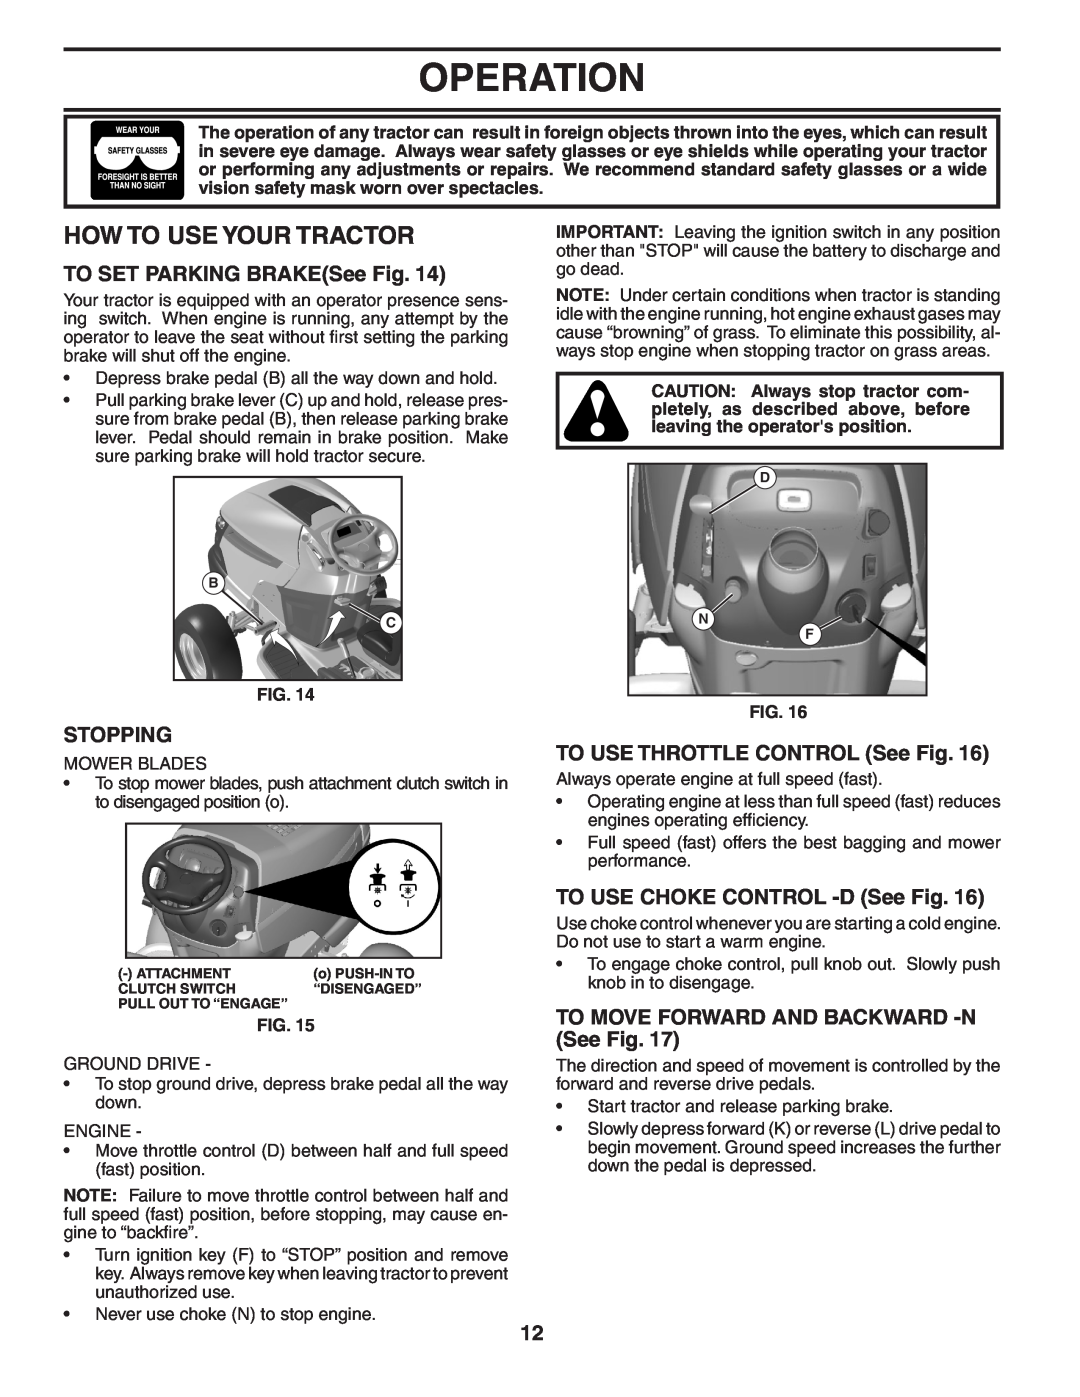 Poulan PBGT22H48 manual How To Use Your Tractor, TO SET PARKING BRAKESee Fig, Stopping, TO USE THROTTLE CONTROL See Fig 